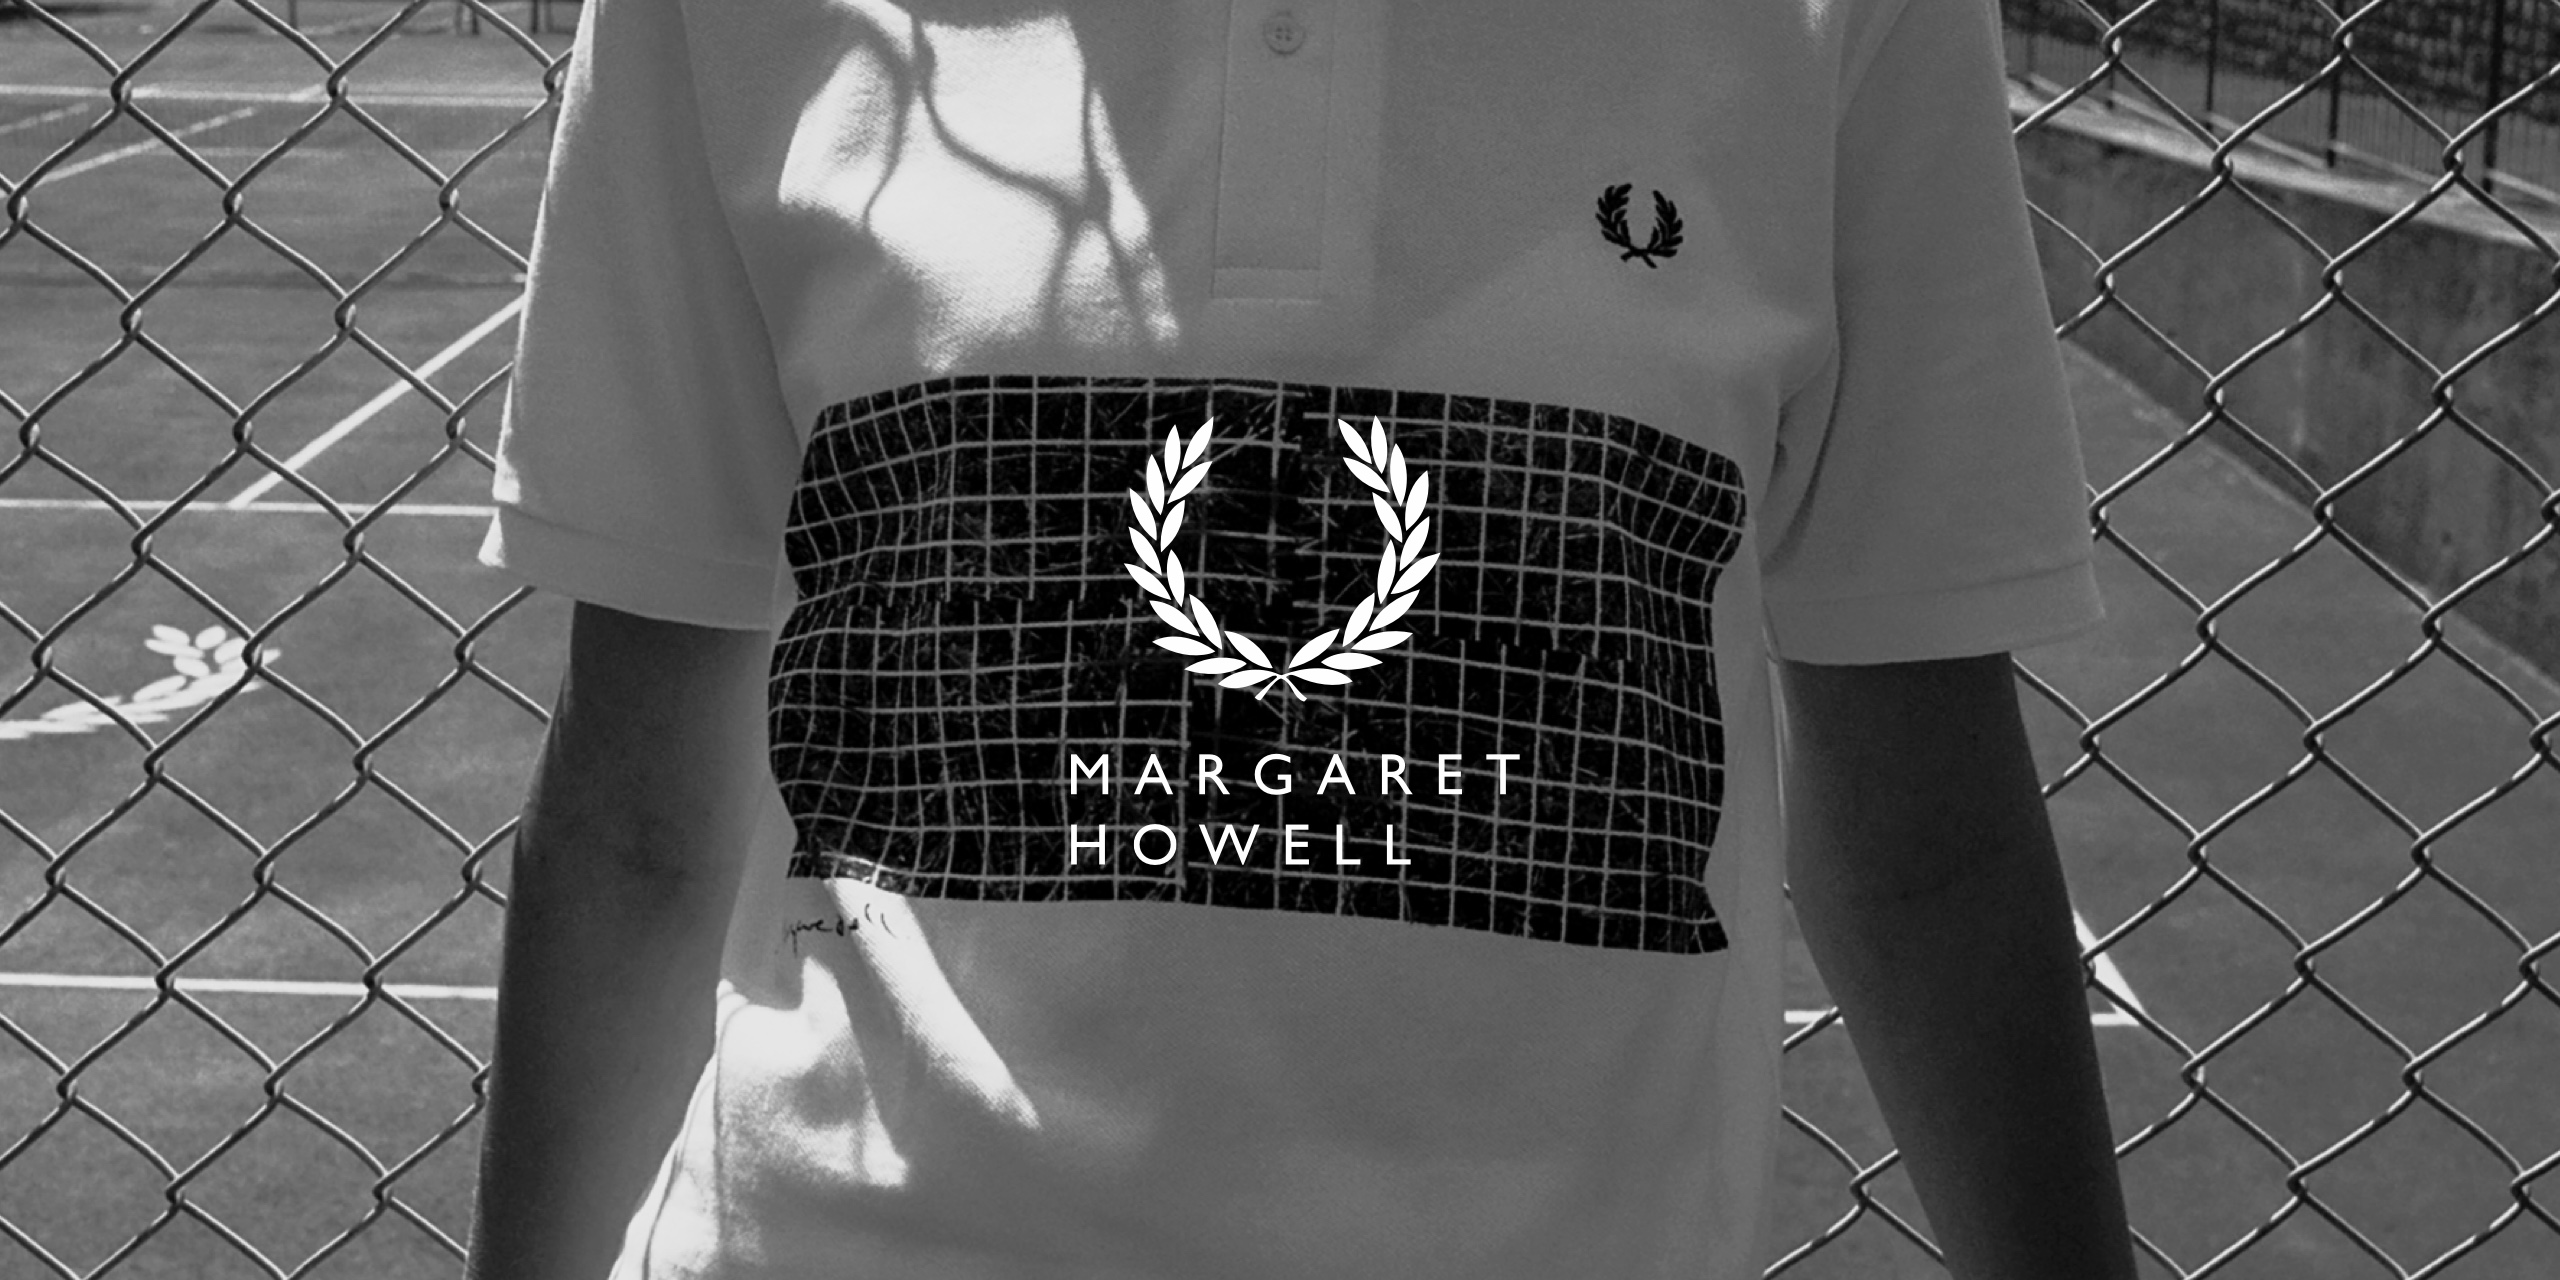 FRED PERRY 】MARGARET HOWELLとコラボレーションしたポロシャツが登場